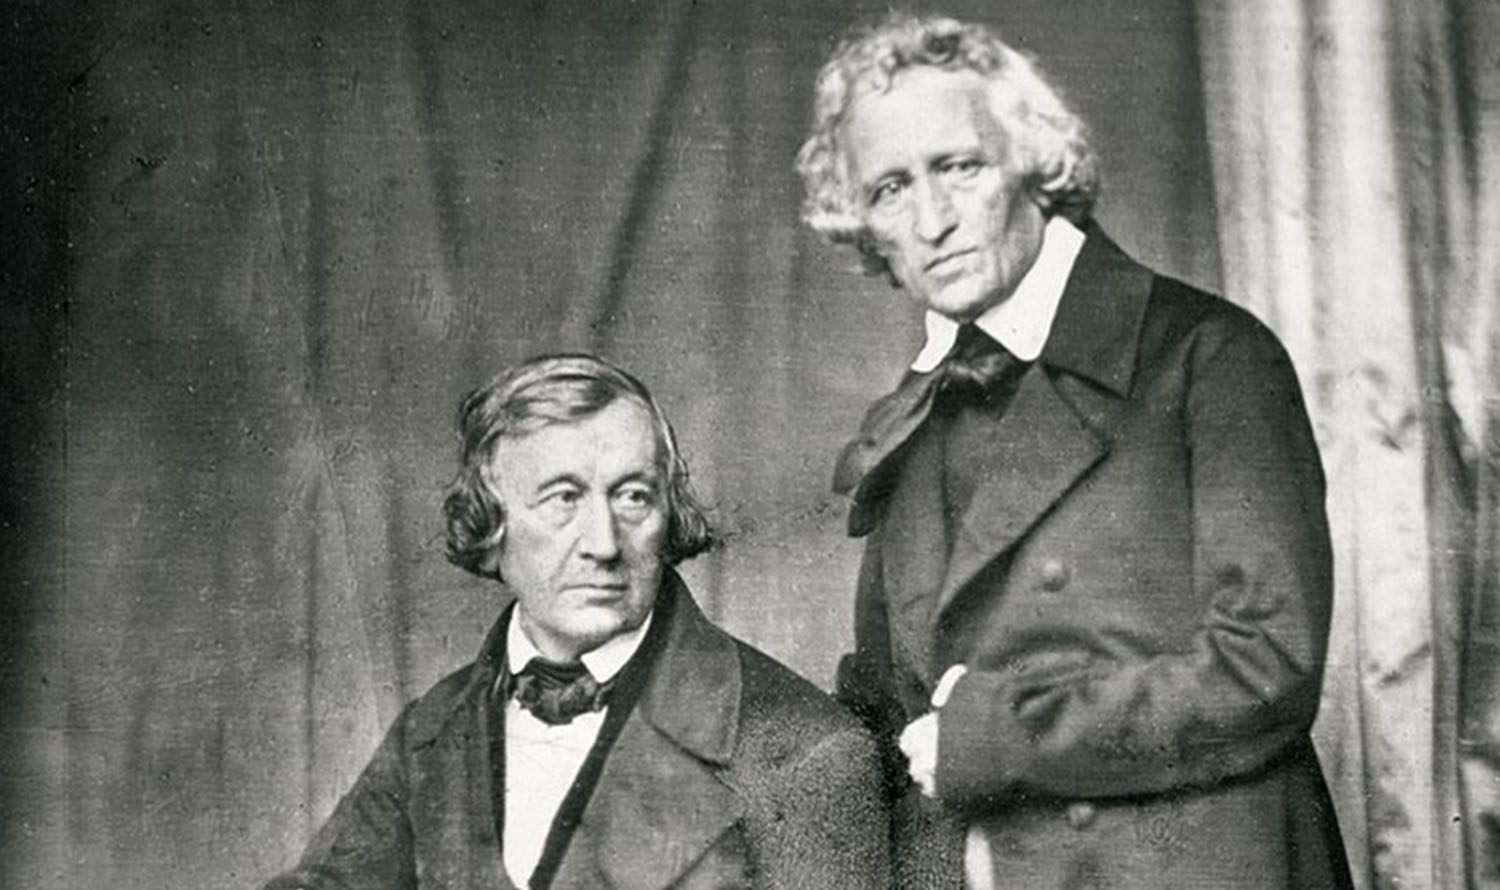 Black and white photography of the Brothers Grimm.